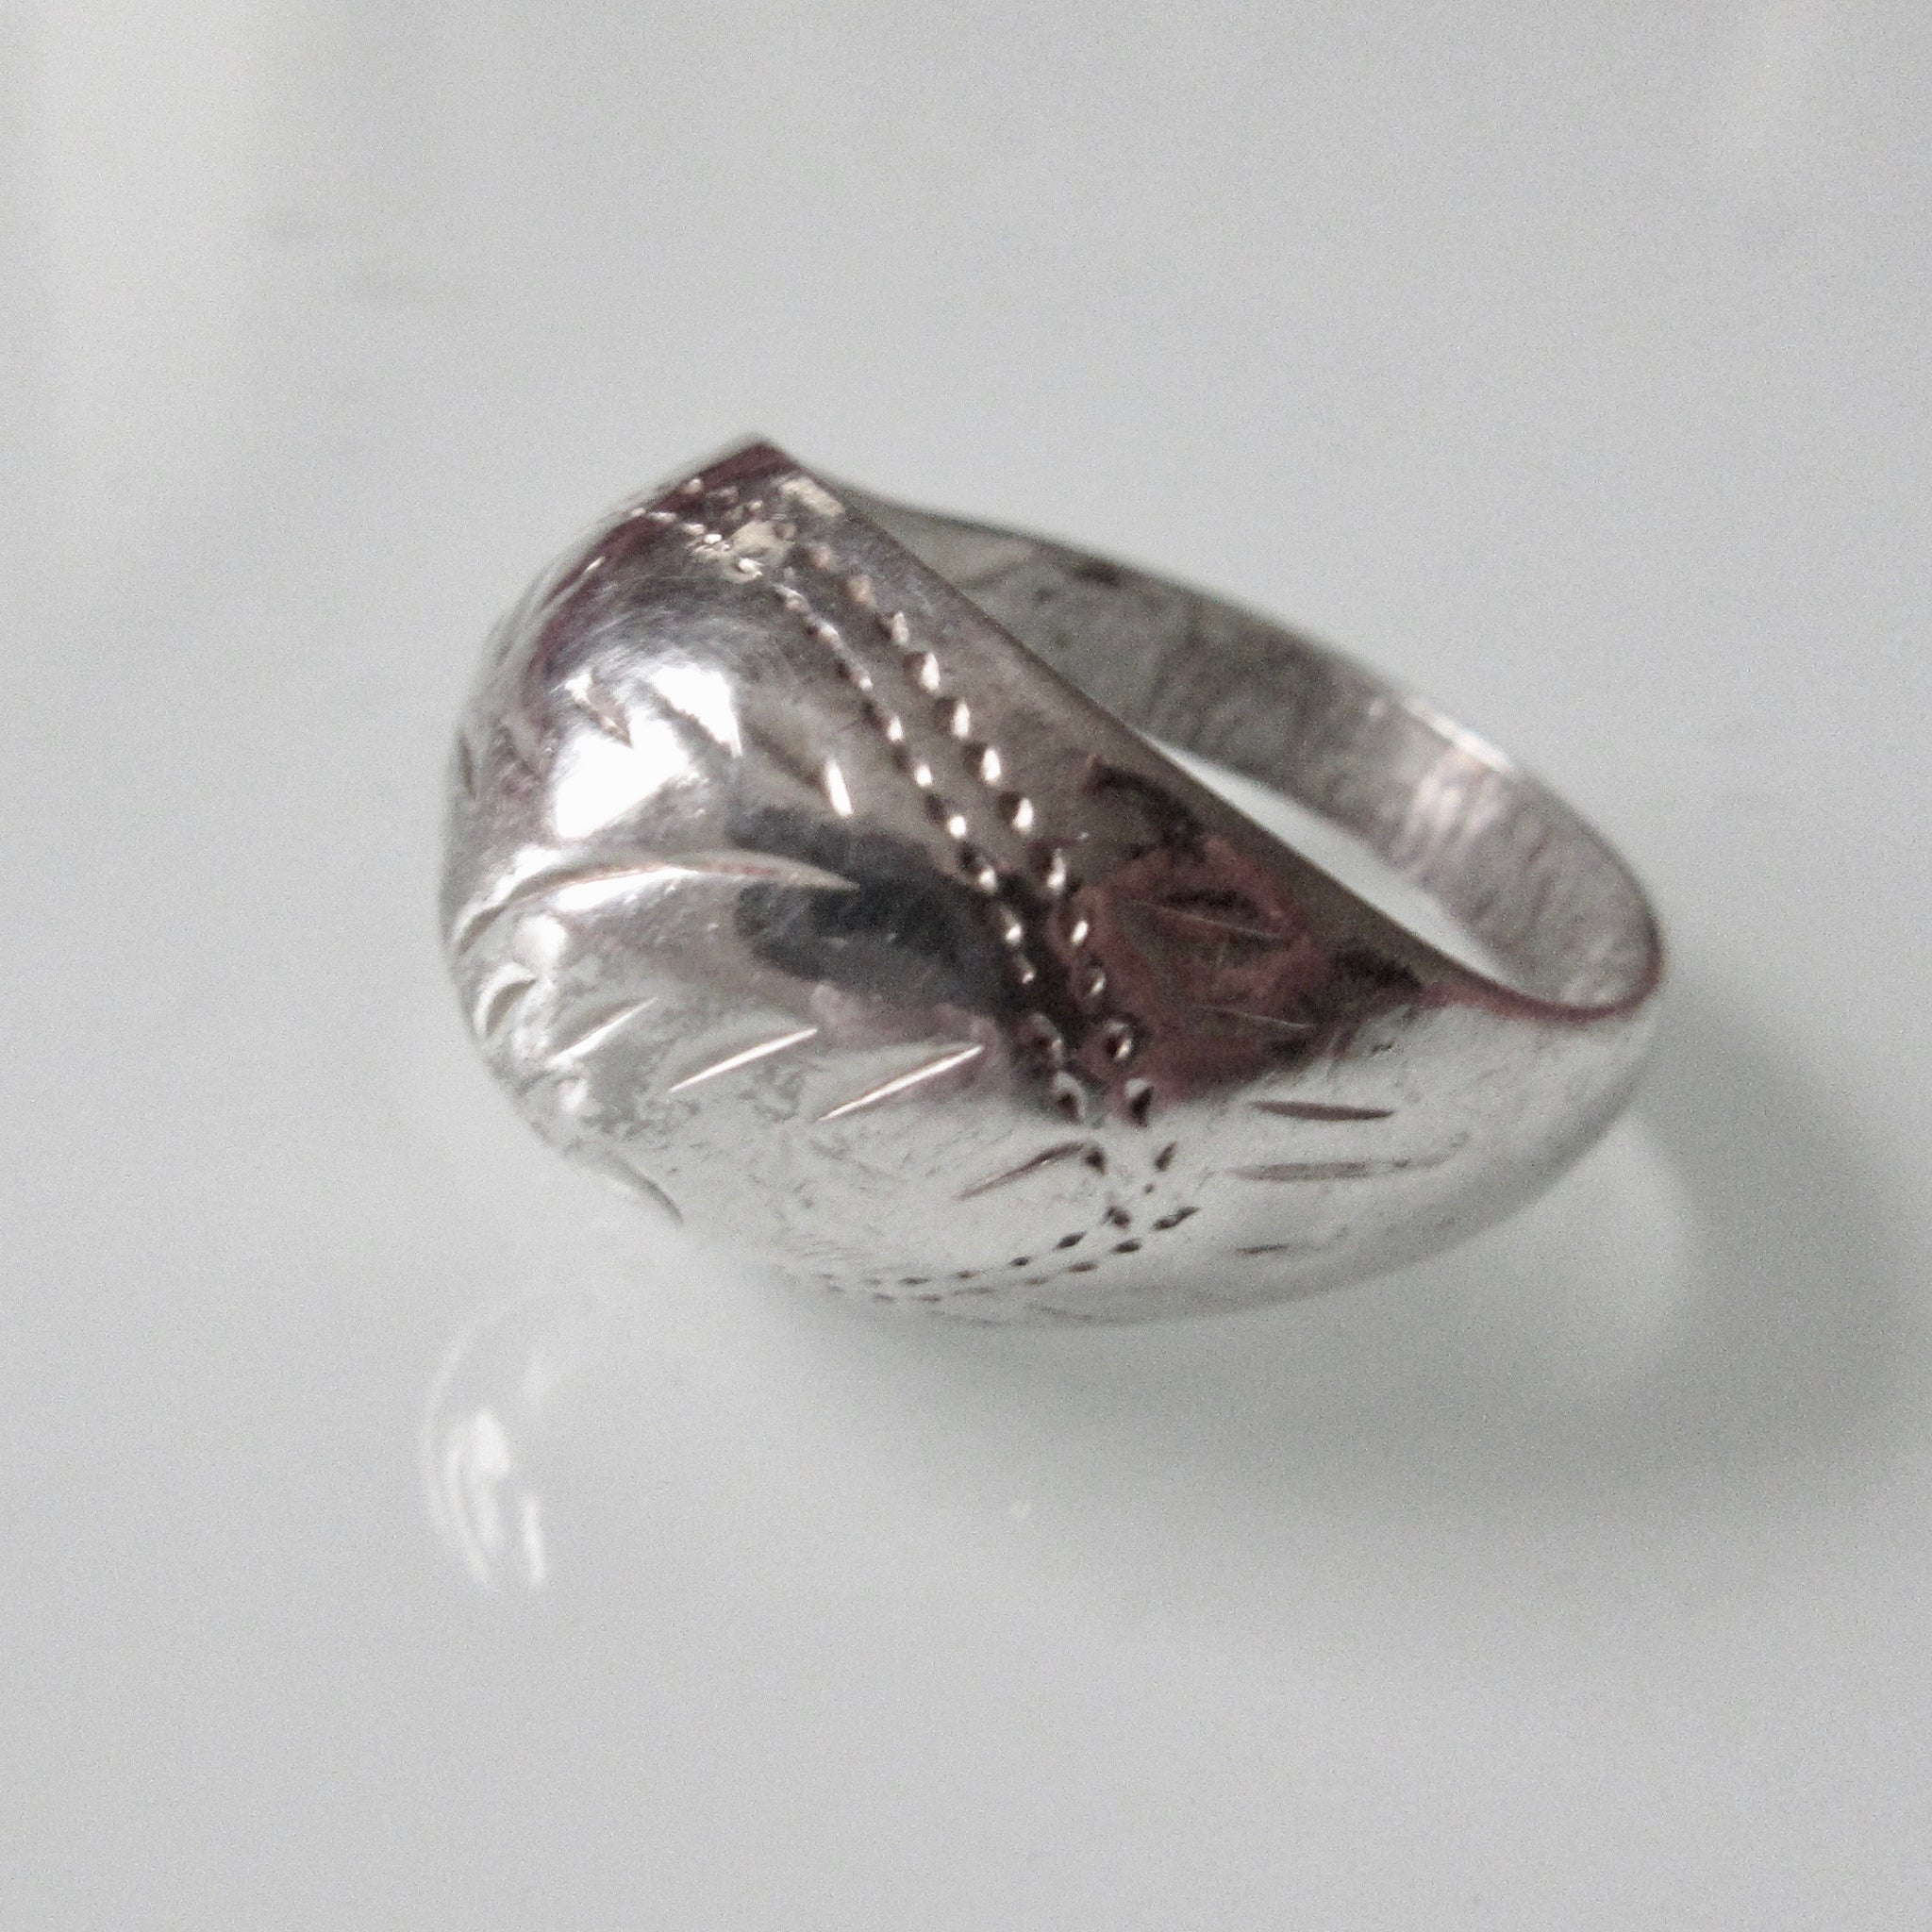 Etched hollow Silver Domed Ring